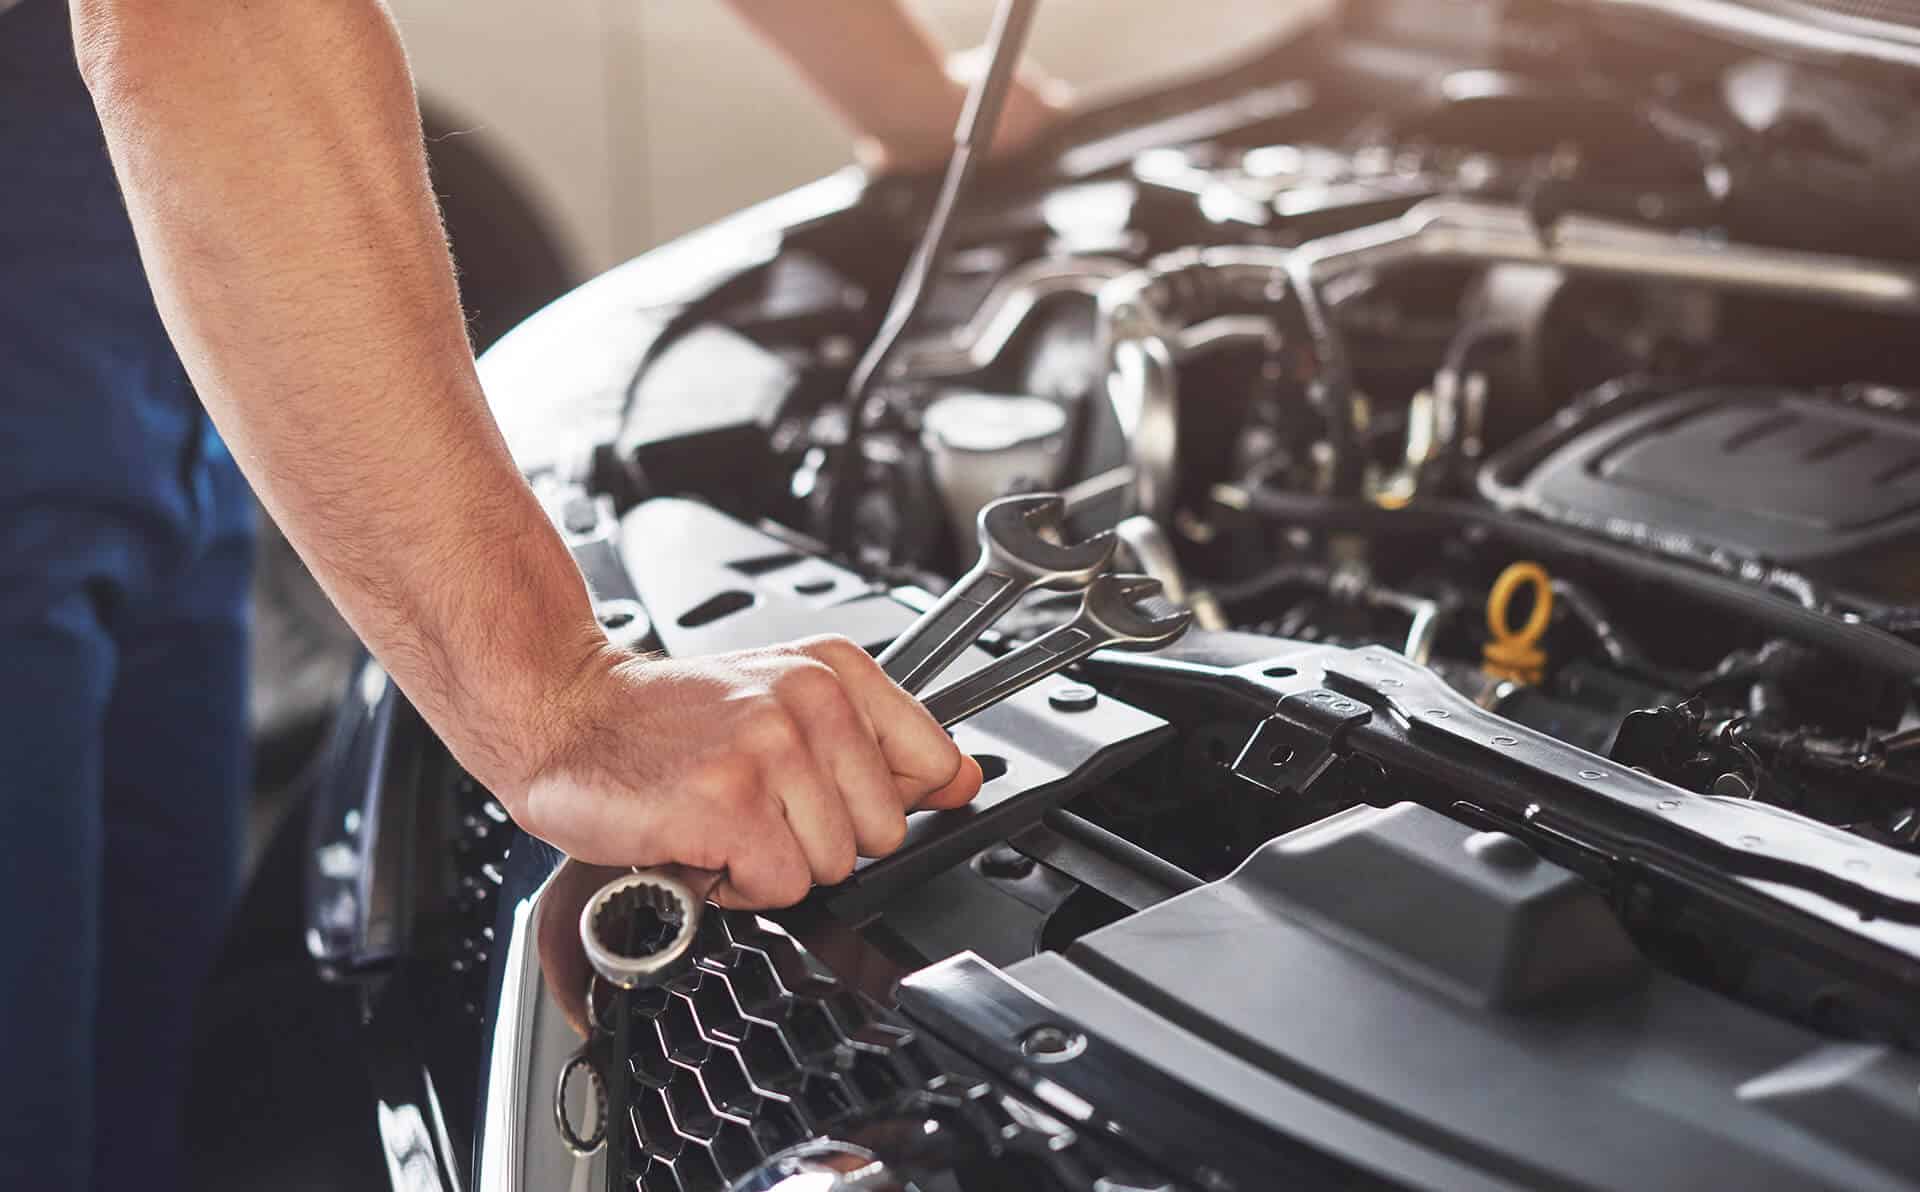 Mechanic Matchmaker How to Find a Trustworthy Expert When You're Clueless About Cars